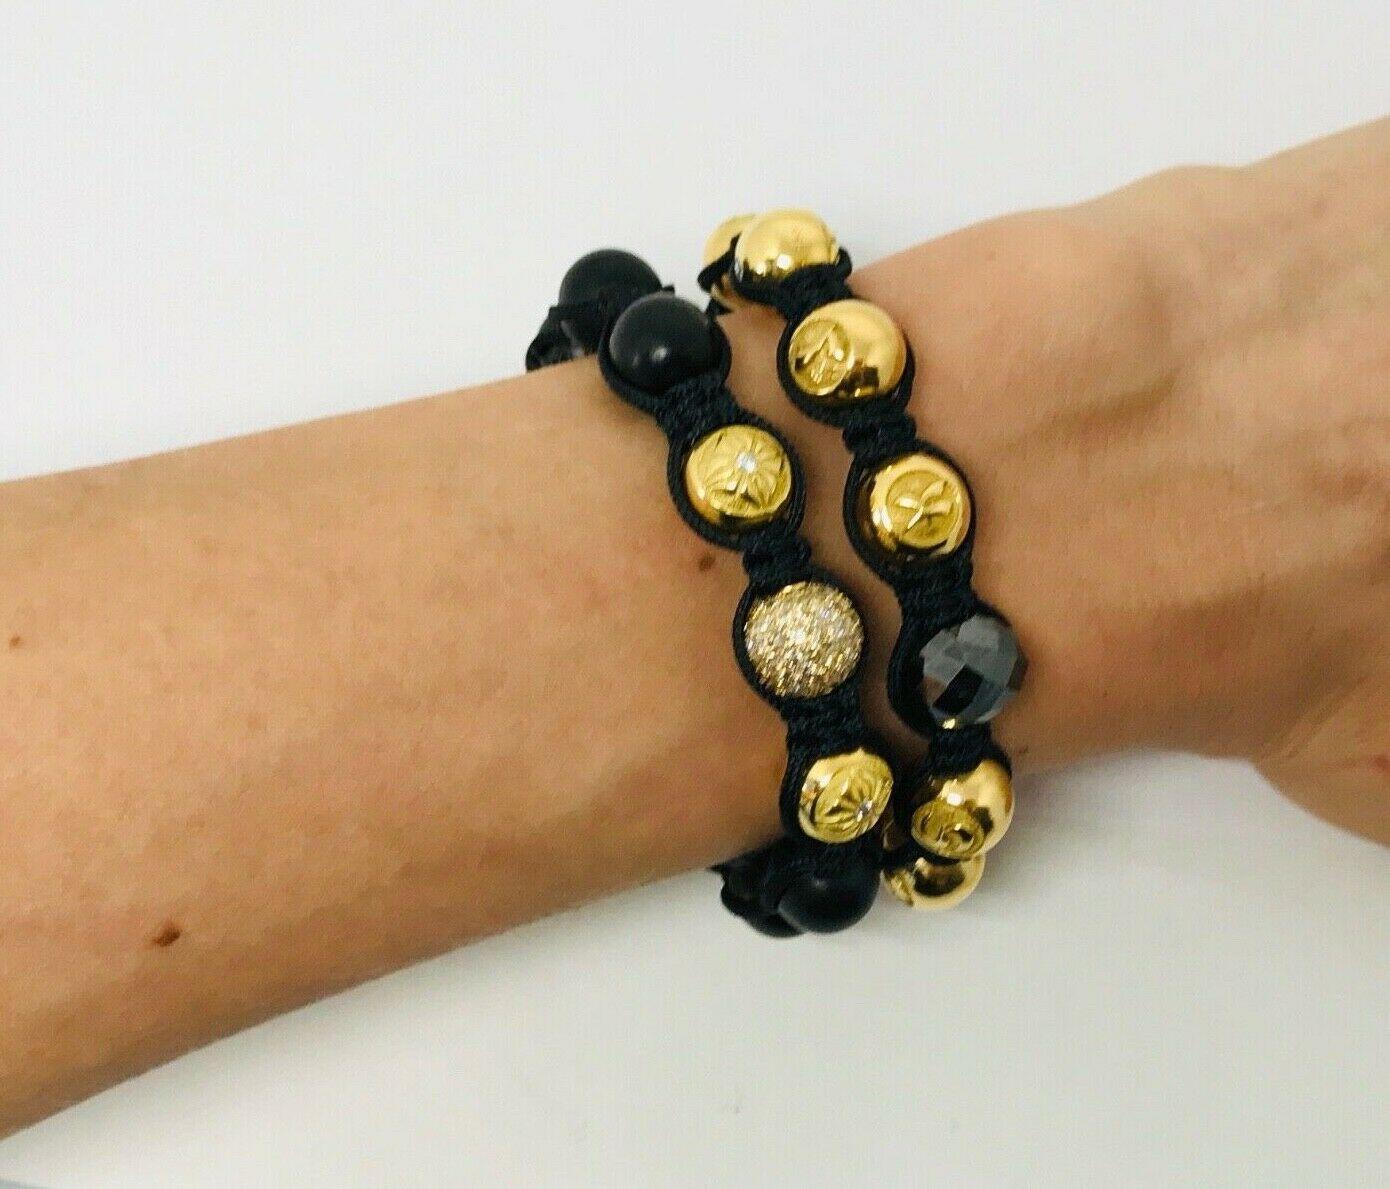 A pair of famous braided Shamballa Jewels bracelets. 
One bracelet features eleven 18k yellow gold beads (6 of them has G/VS diamonds), one black solid faceted diamond bead and a black Tahiti pearl bead. 
Another features 6 black wood beads, six 18k